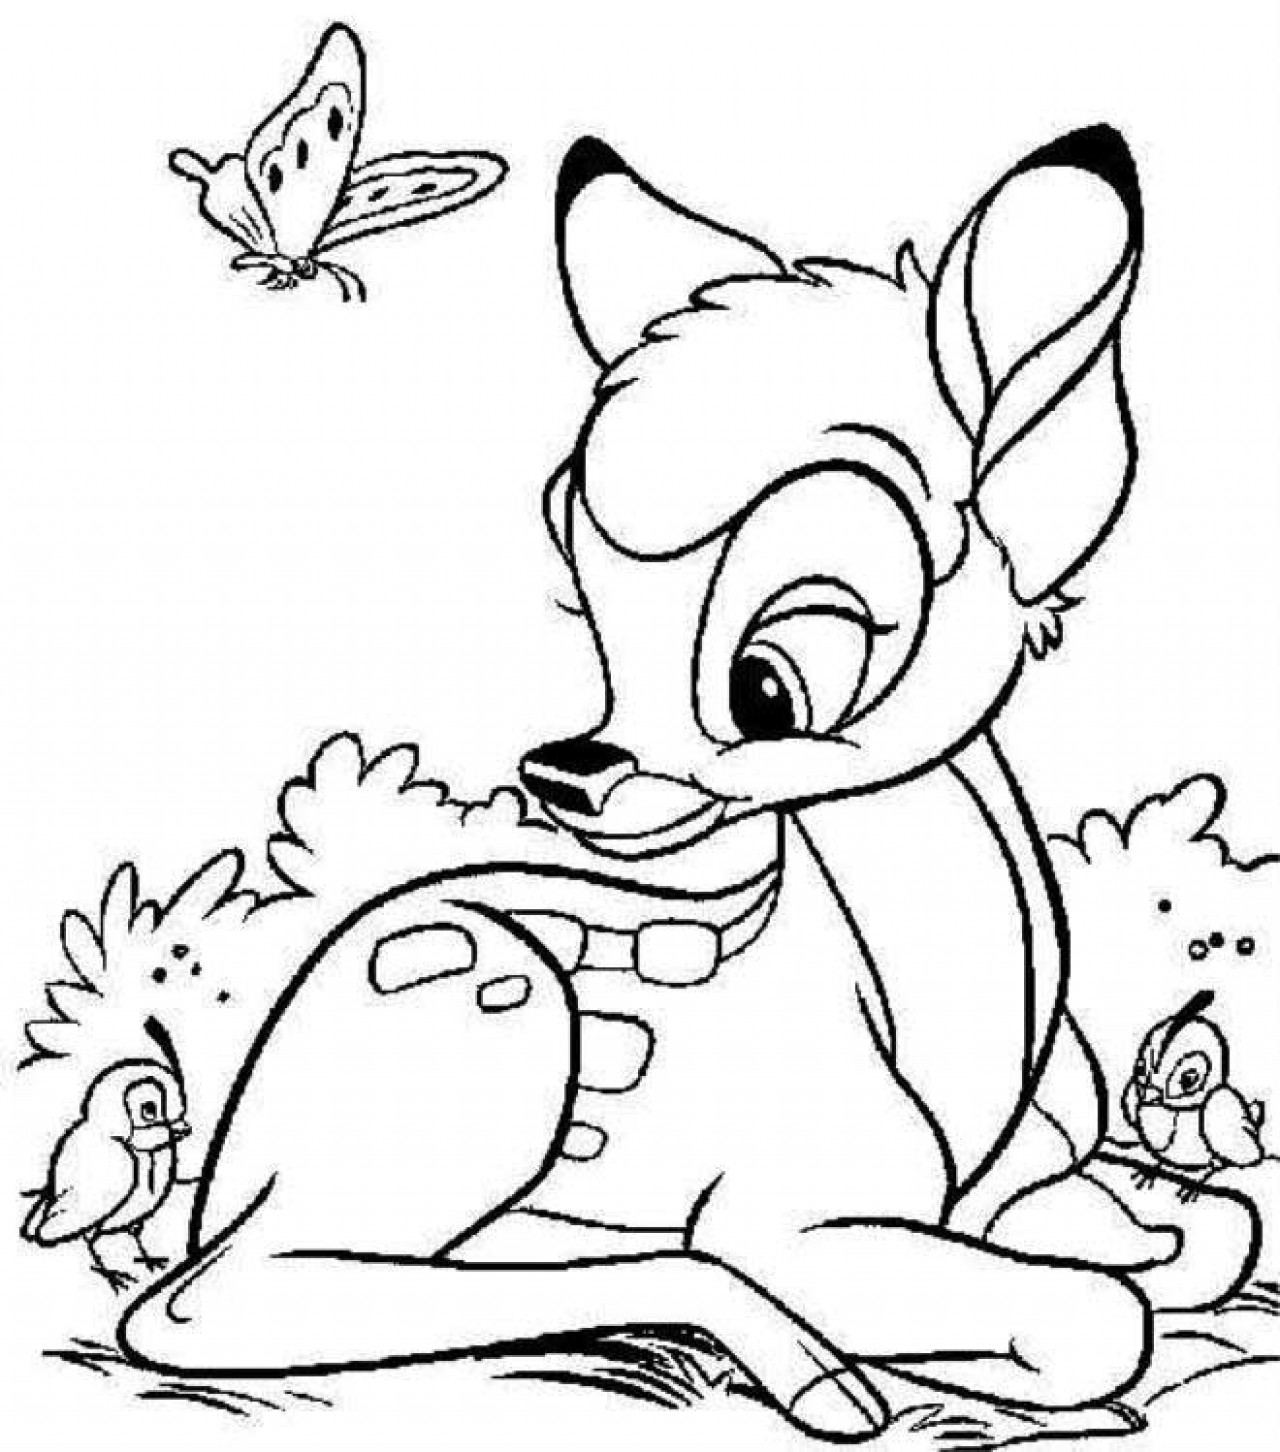 Printable Kids Coloring Sheets
 printable coloring pages of adorable puppies for kids